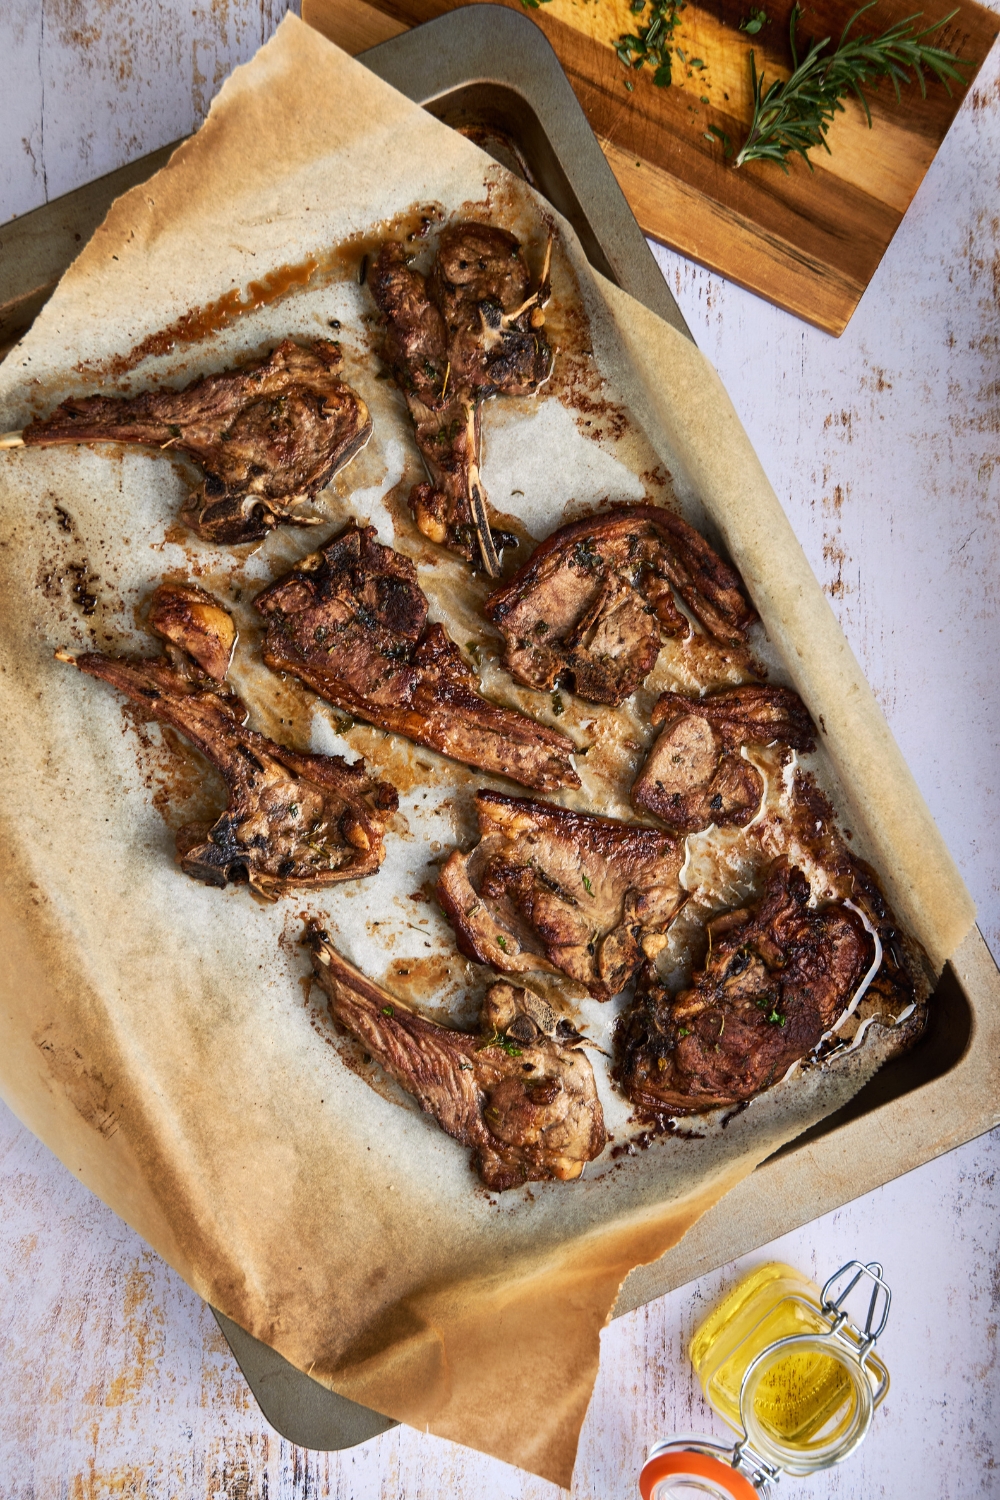 A baking tray is lined with parchment paper and holds oven baked lamb shoulder chops.